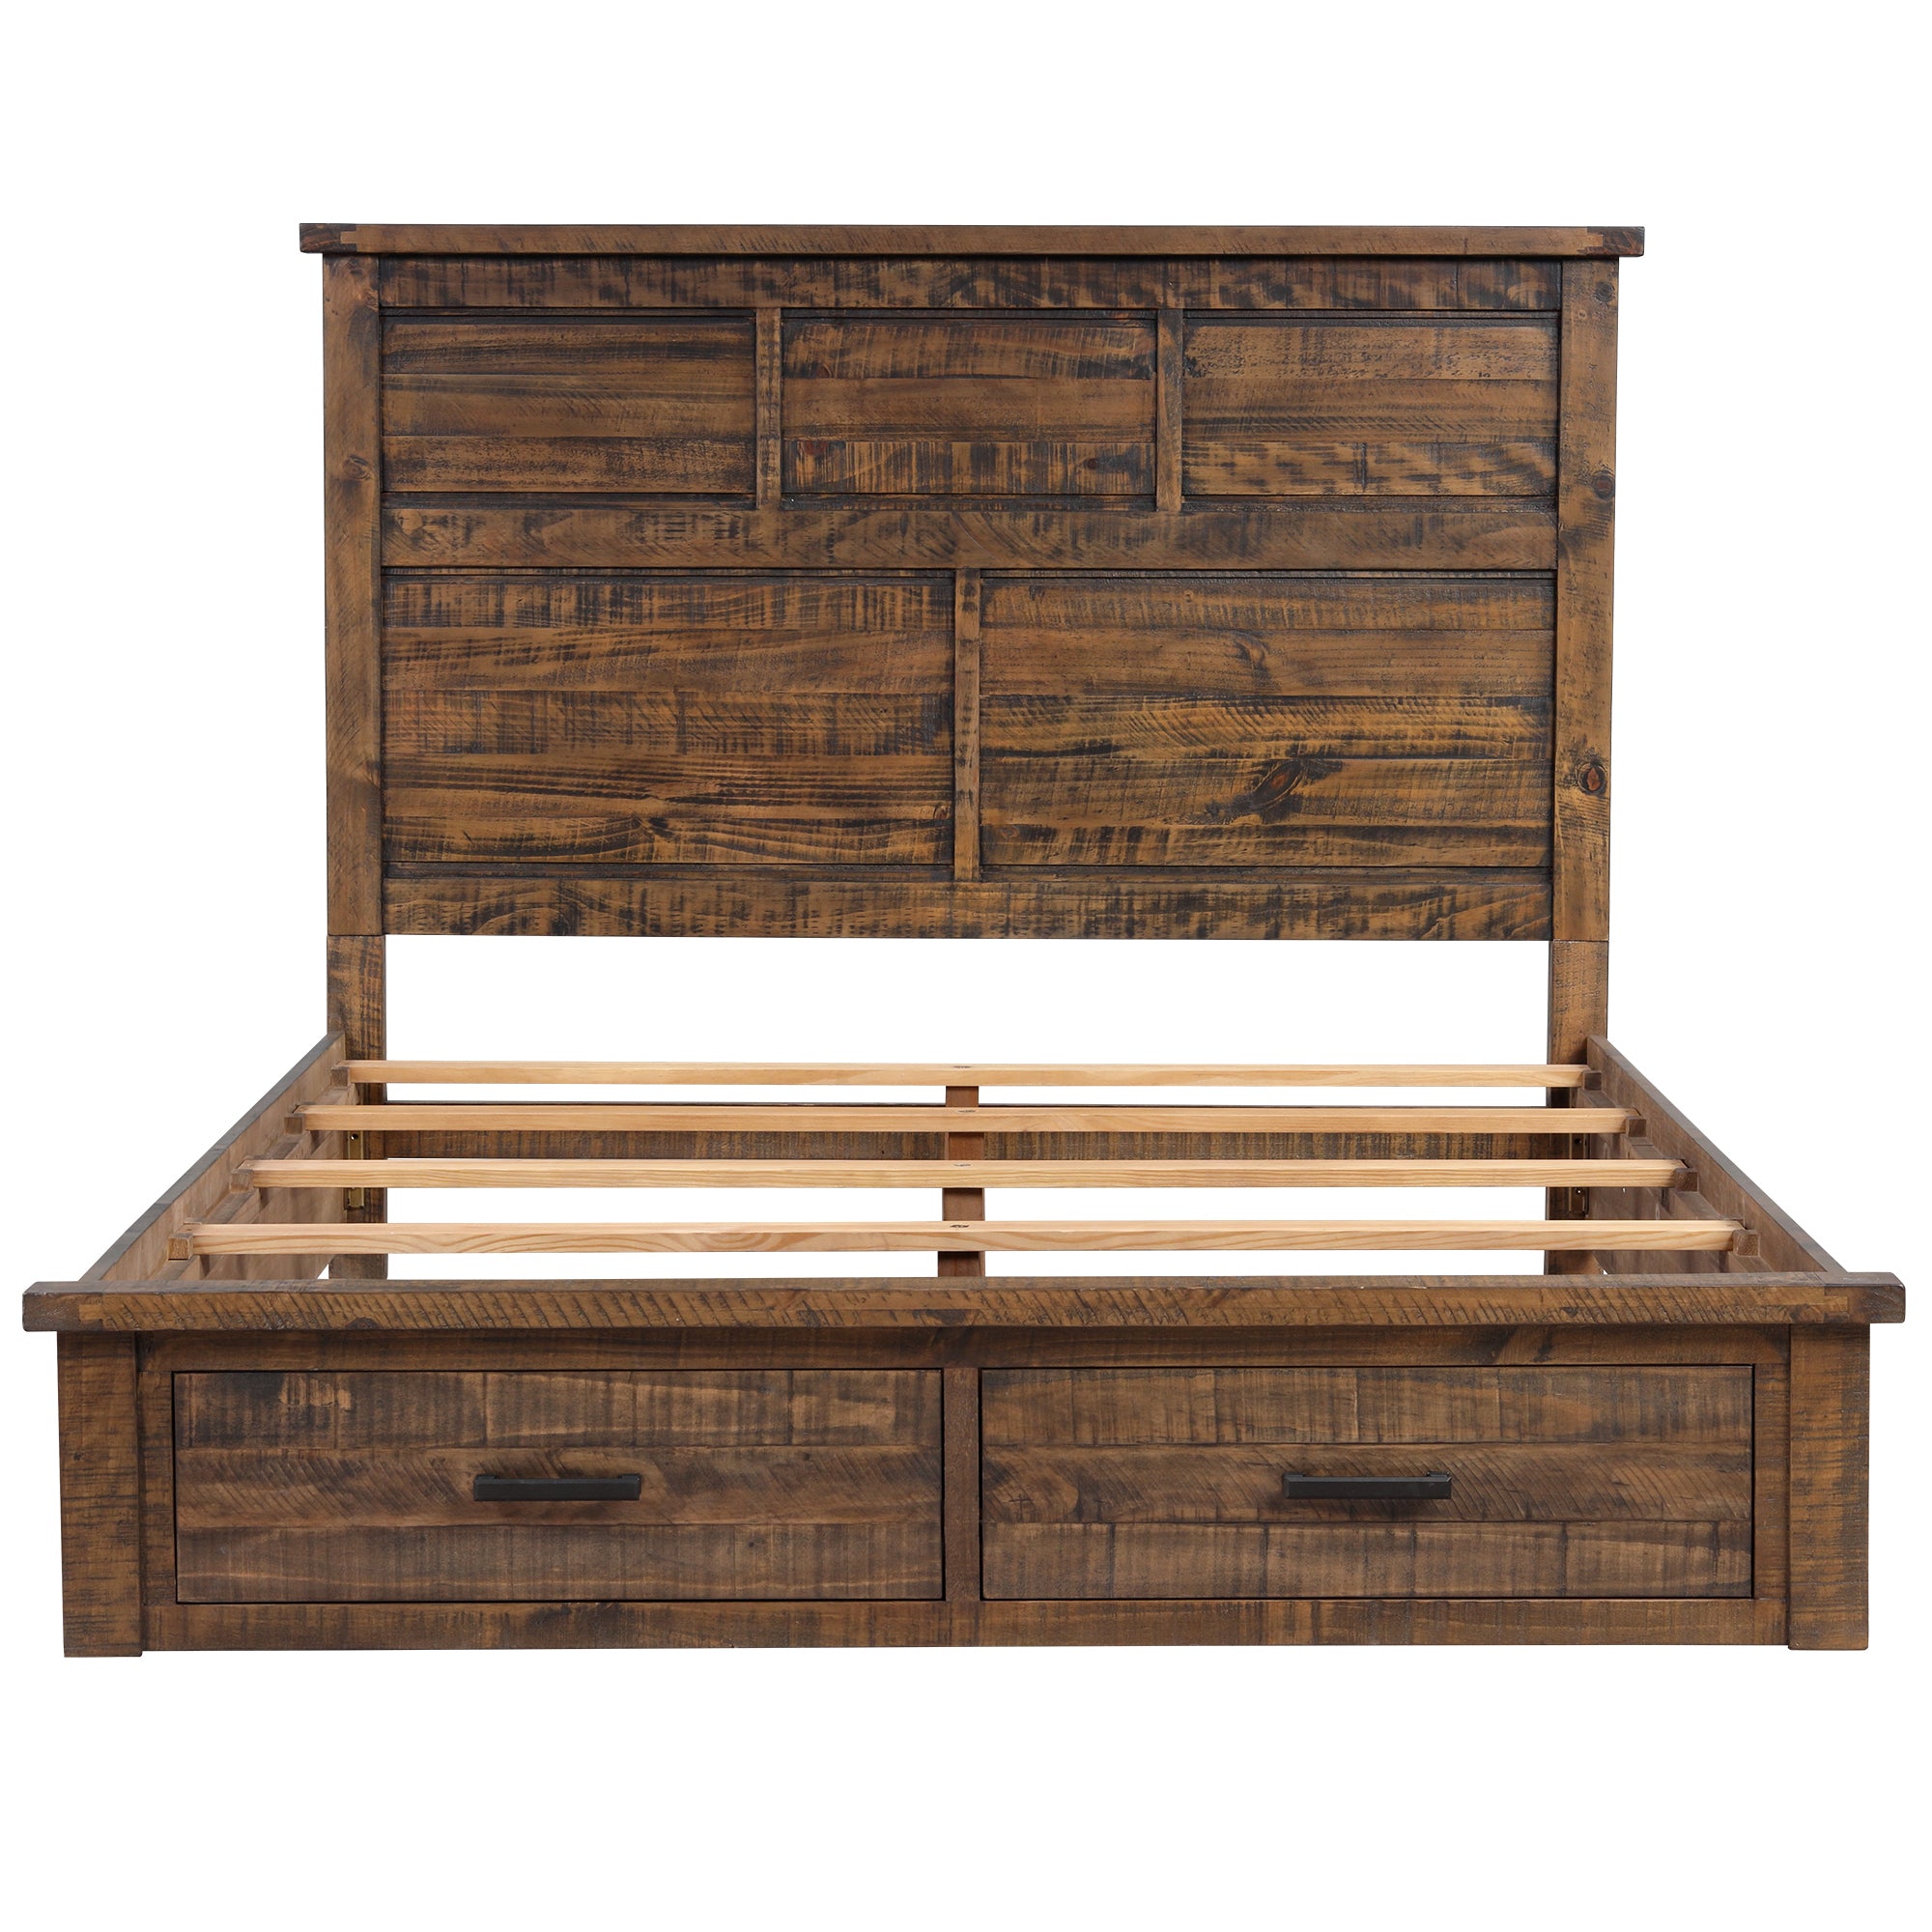 Rustic Reclaimed Solid Wood Framhouse Storage Queen Bed